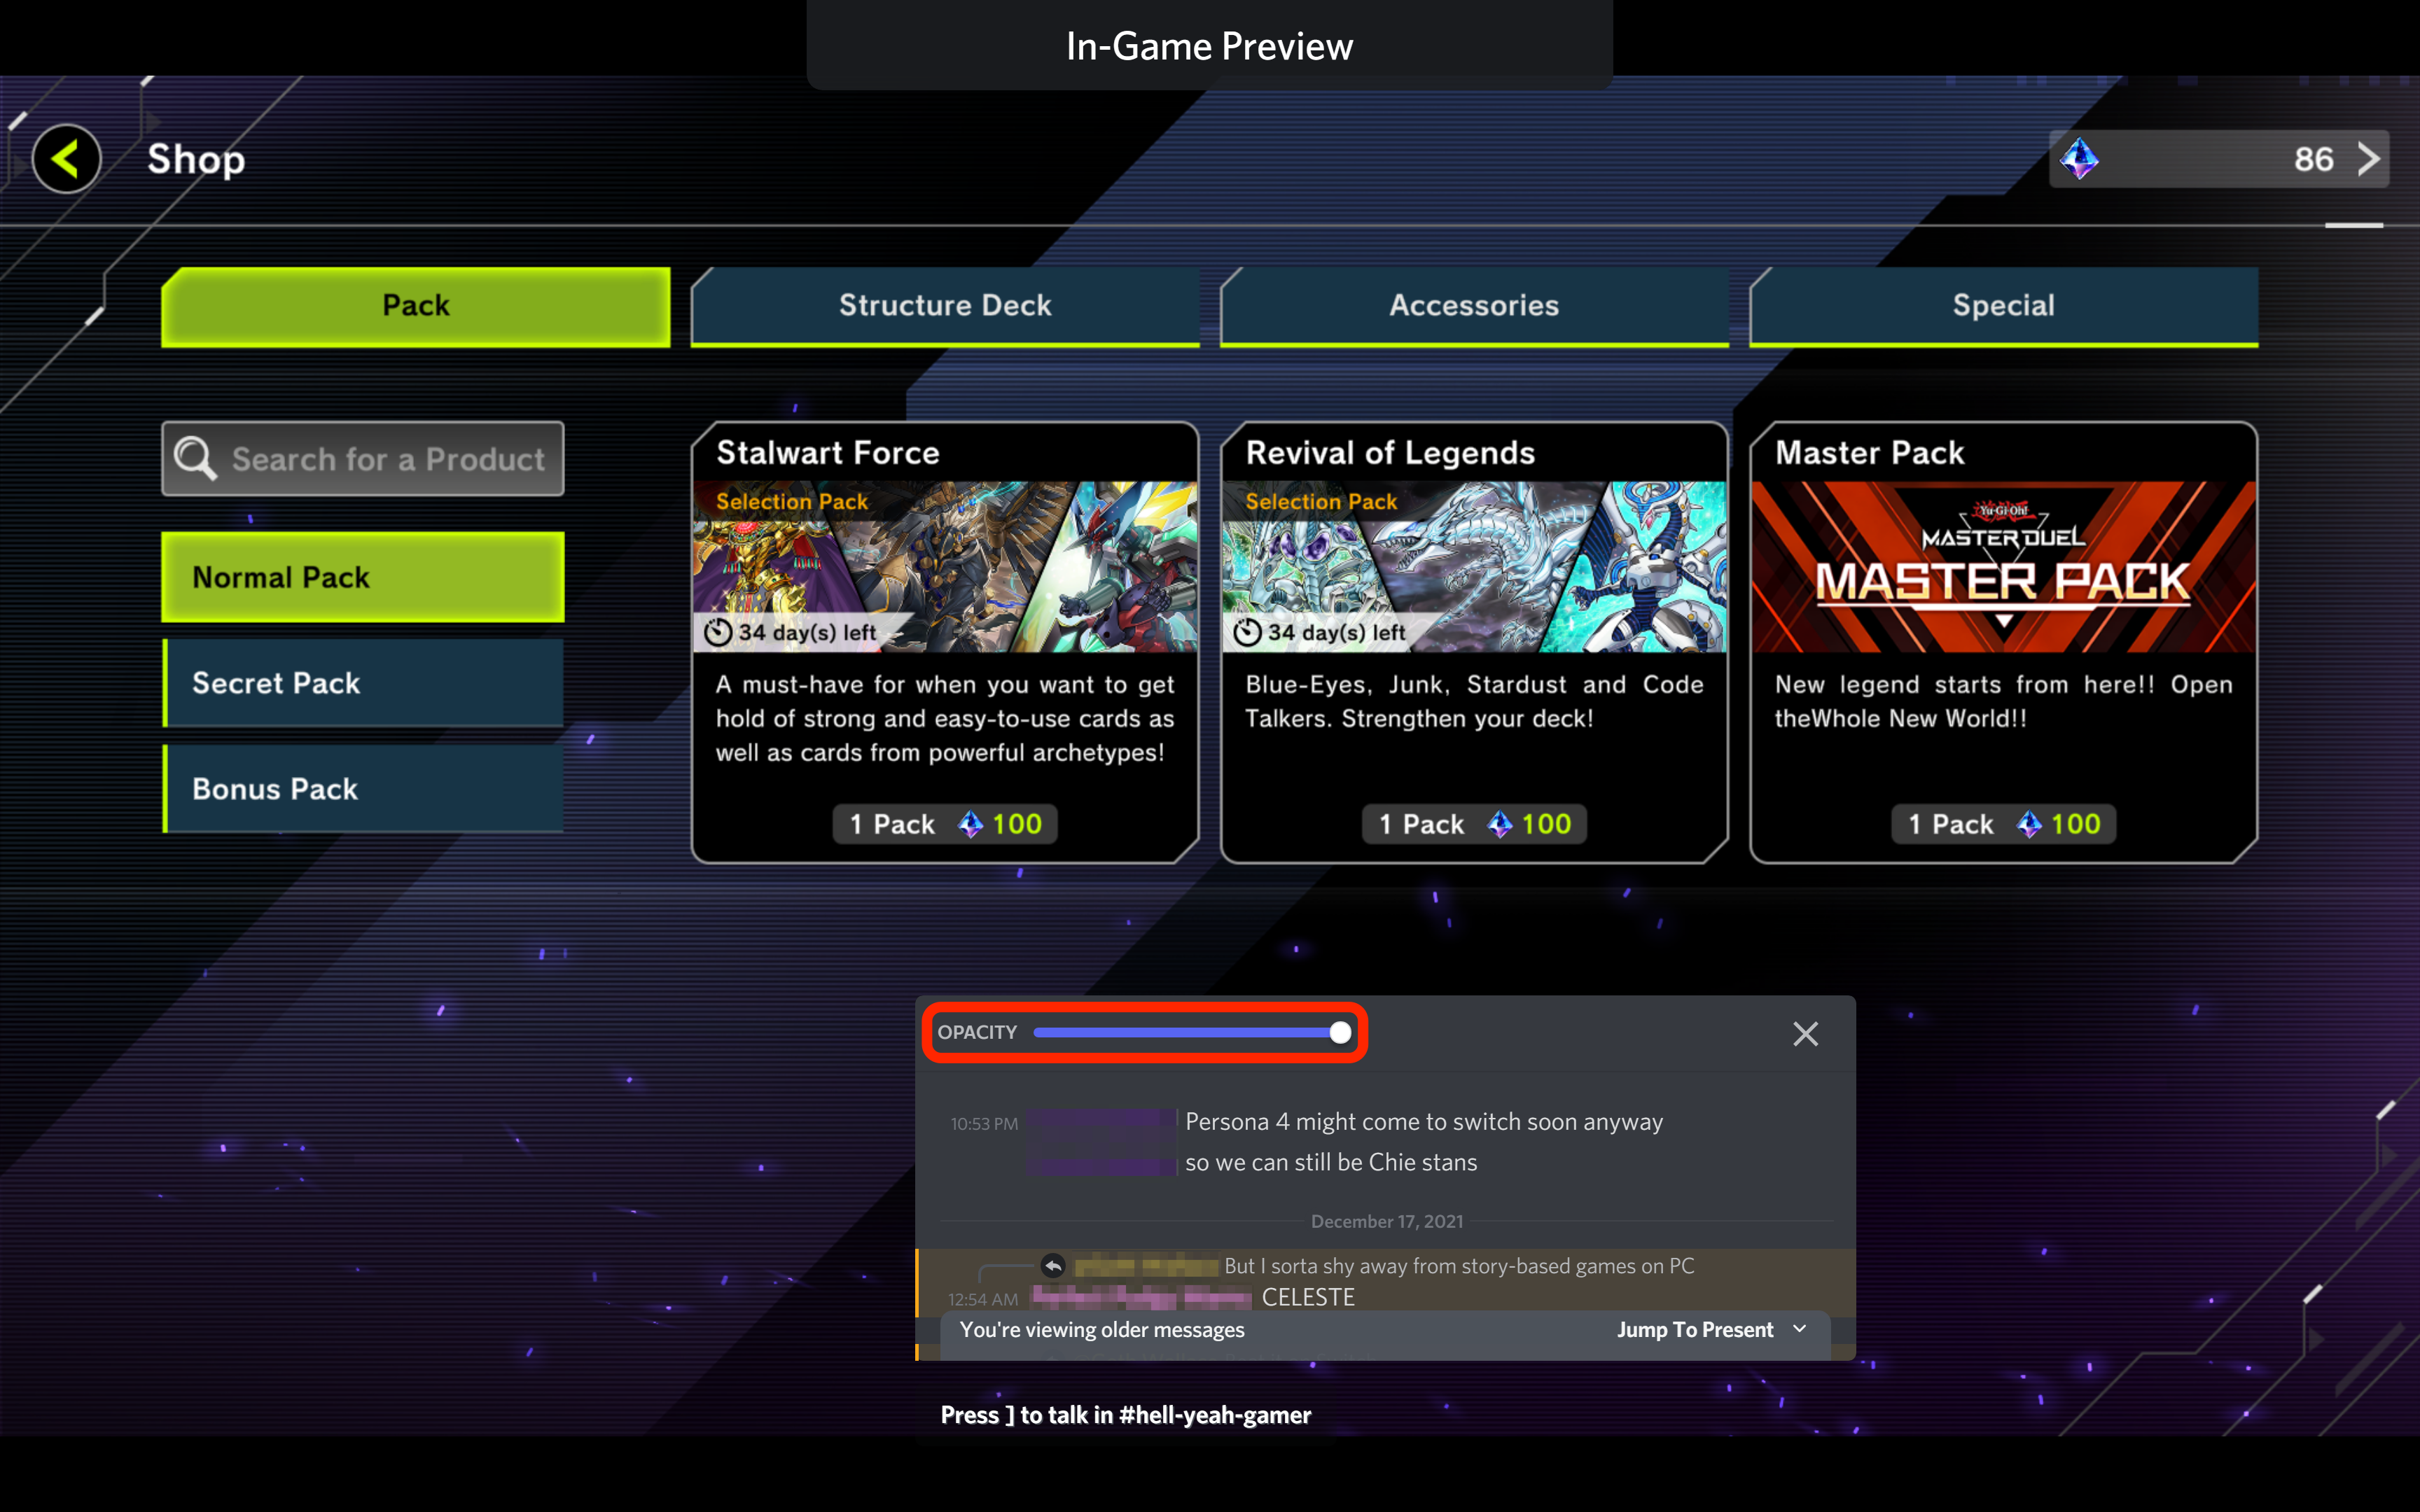 A screenshot of the game "Yu-Gi-Oh! Master Duel" with a Discord chat in the foreground.